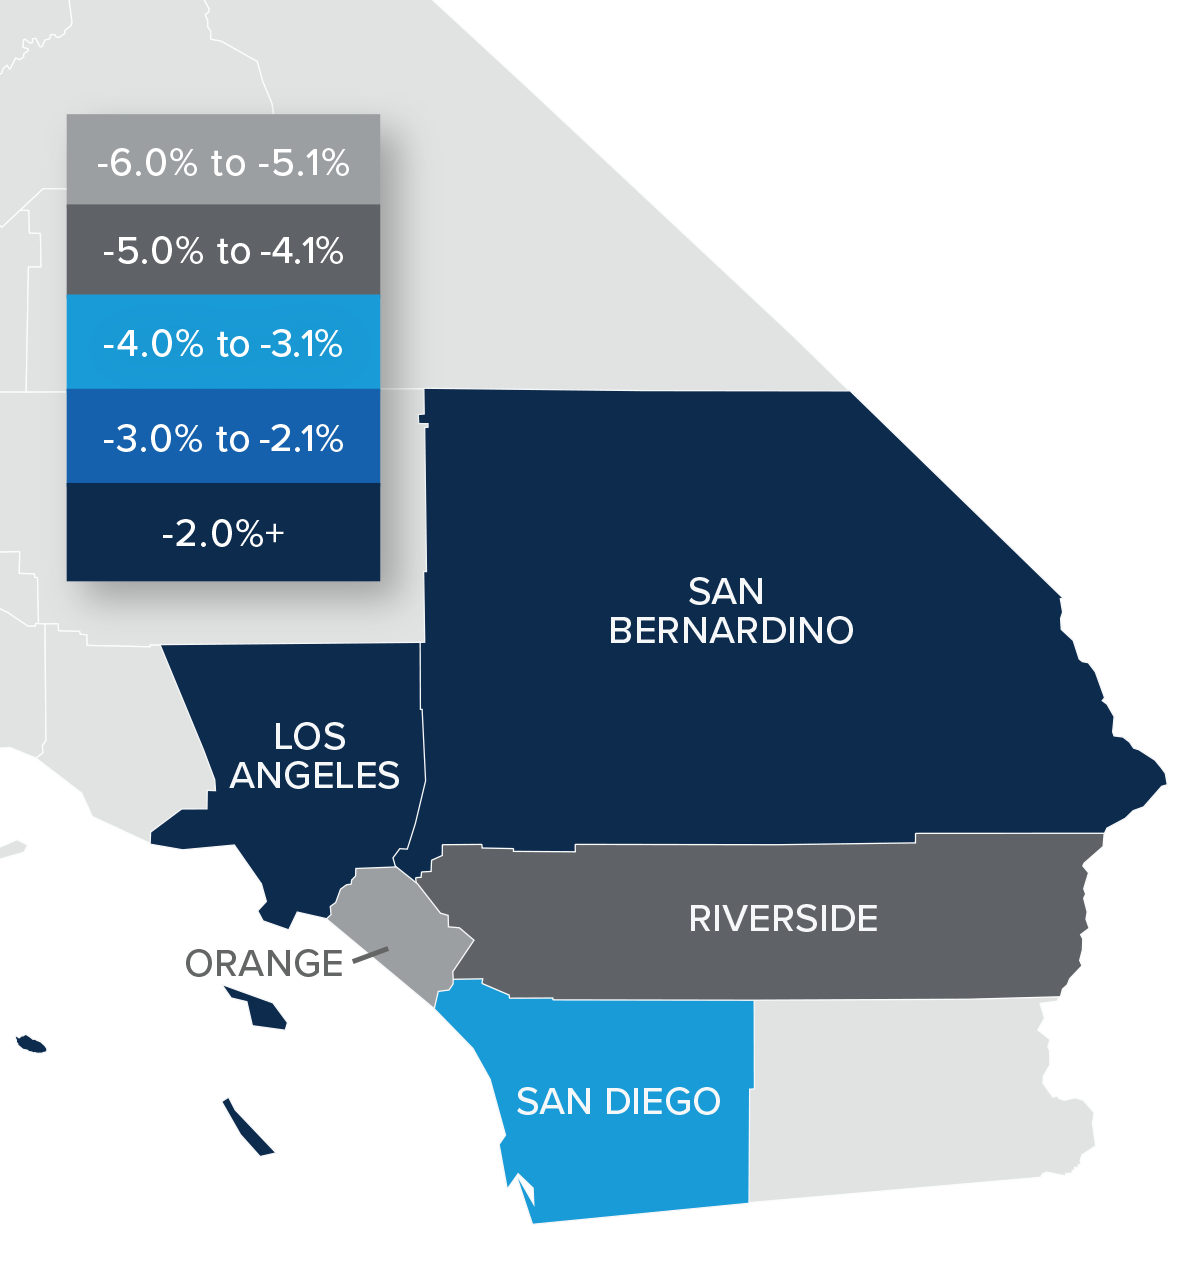 A map showing the real estate home prices percentage changes for various counties in Southern California. Different colors correspond to different tiers of percentage change. Orange County has a percentage change in the -6% to -5.1% range, Riverside is in the -5% to -4.1% change range, San Diego in the -4% to -3.1% change range, and Los Angeles and San Bernardino are in the 2%+ change range.